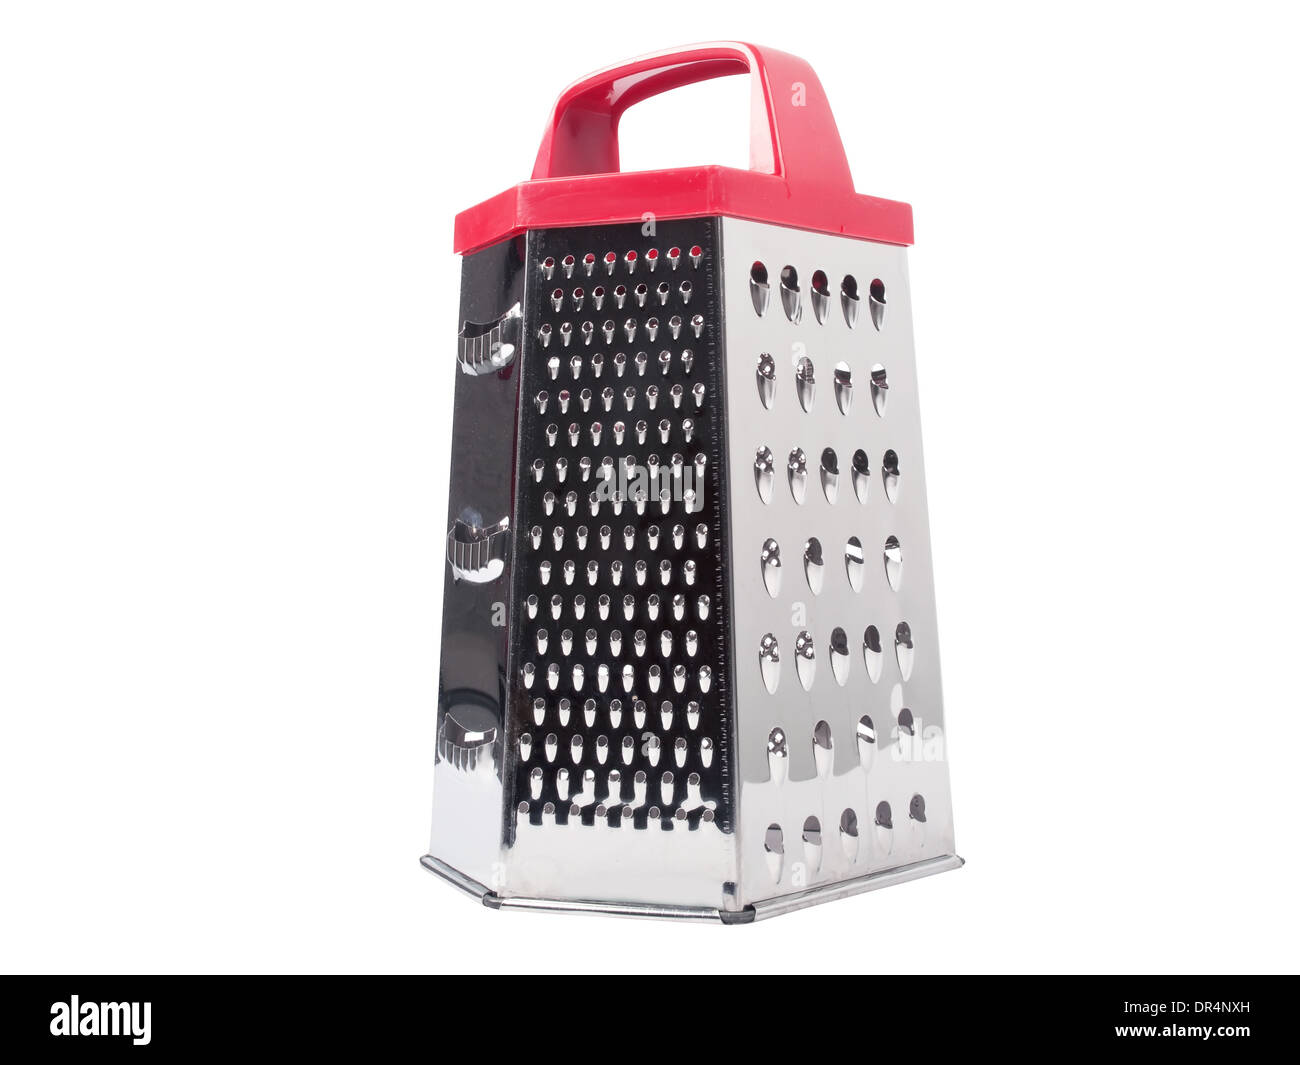 Metal grater with red handle isolated on white background Stock Photo